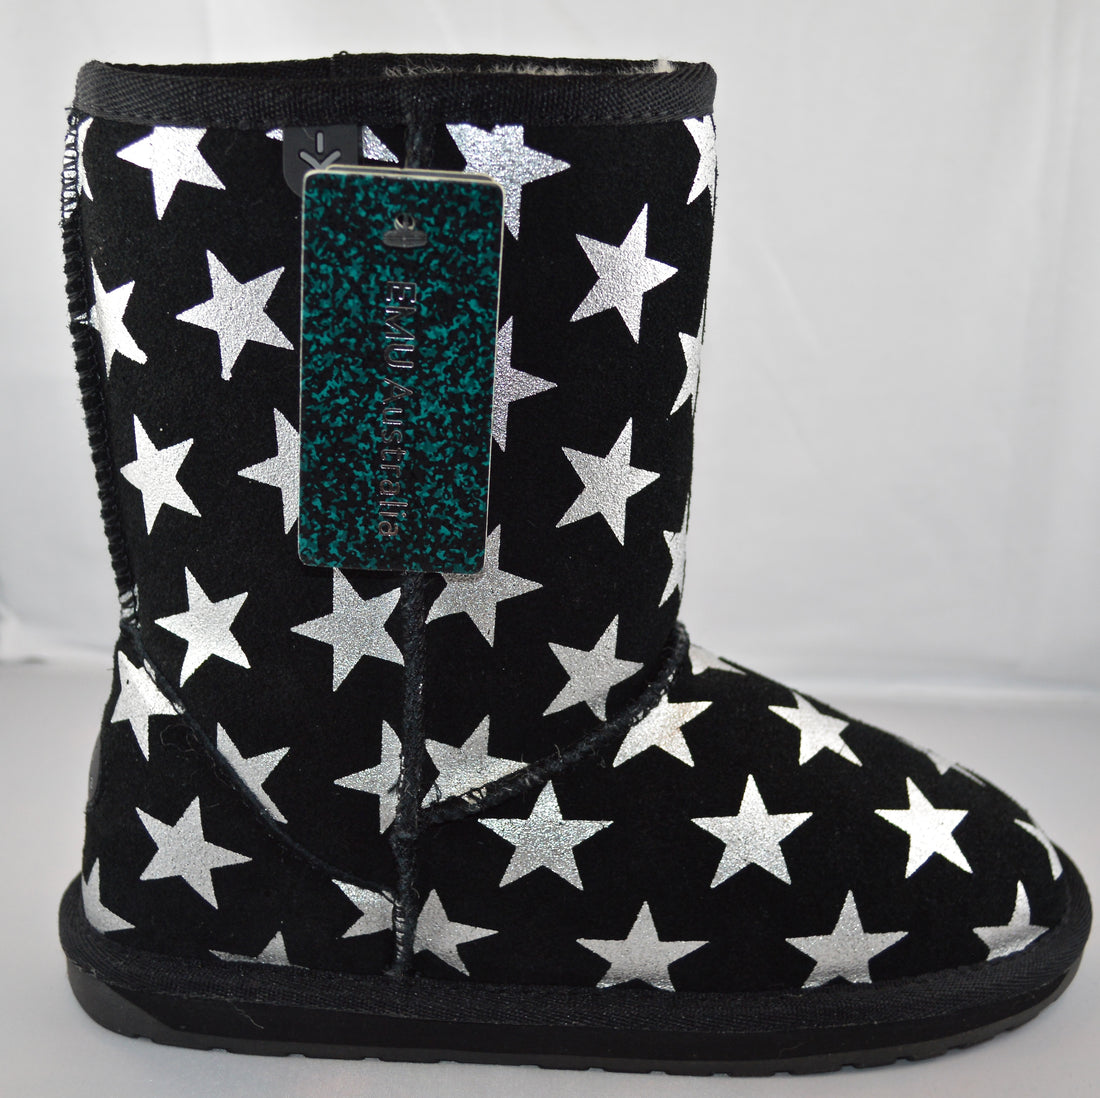 EMU ankle boots with black or purple stars